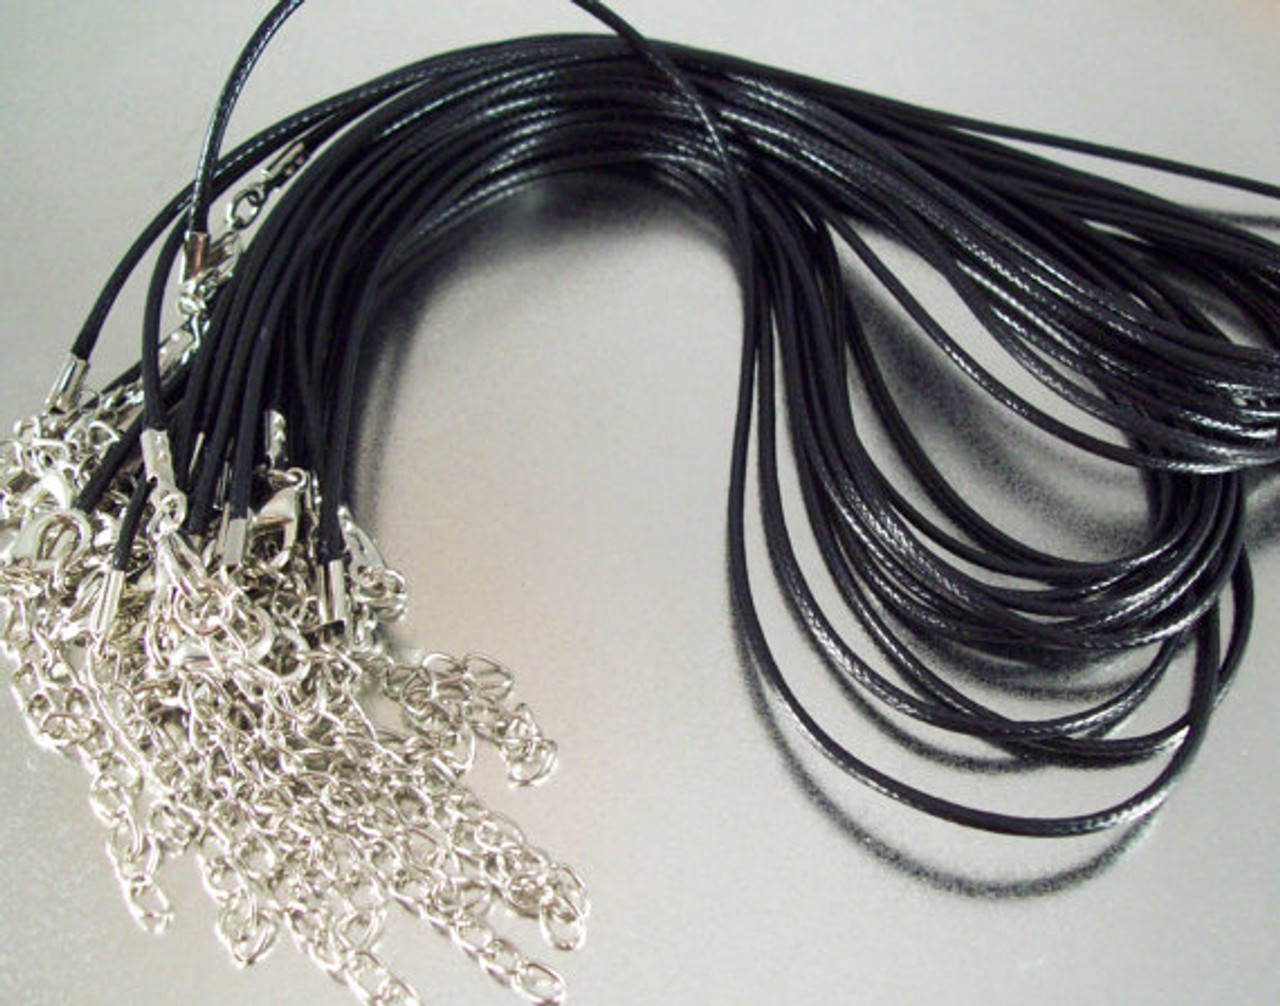 100 Black Cord Necklaces 17-19 inch 2mm